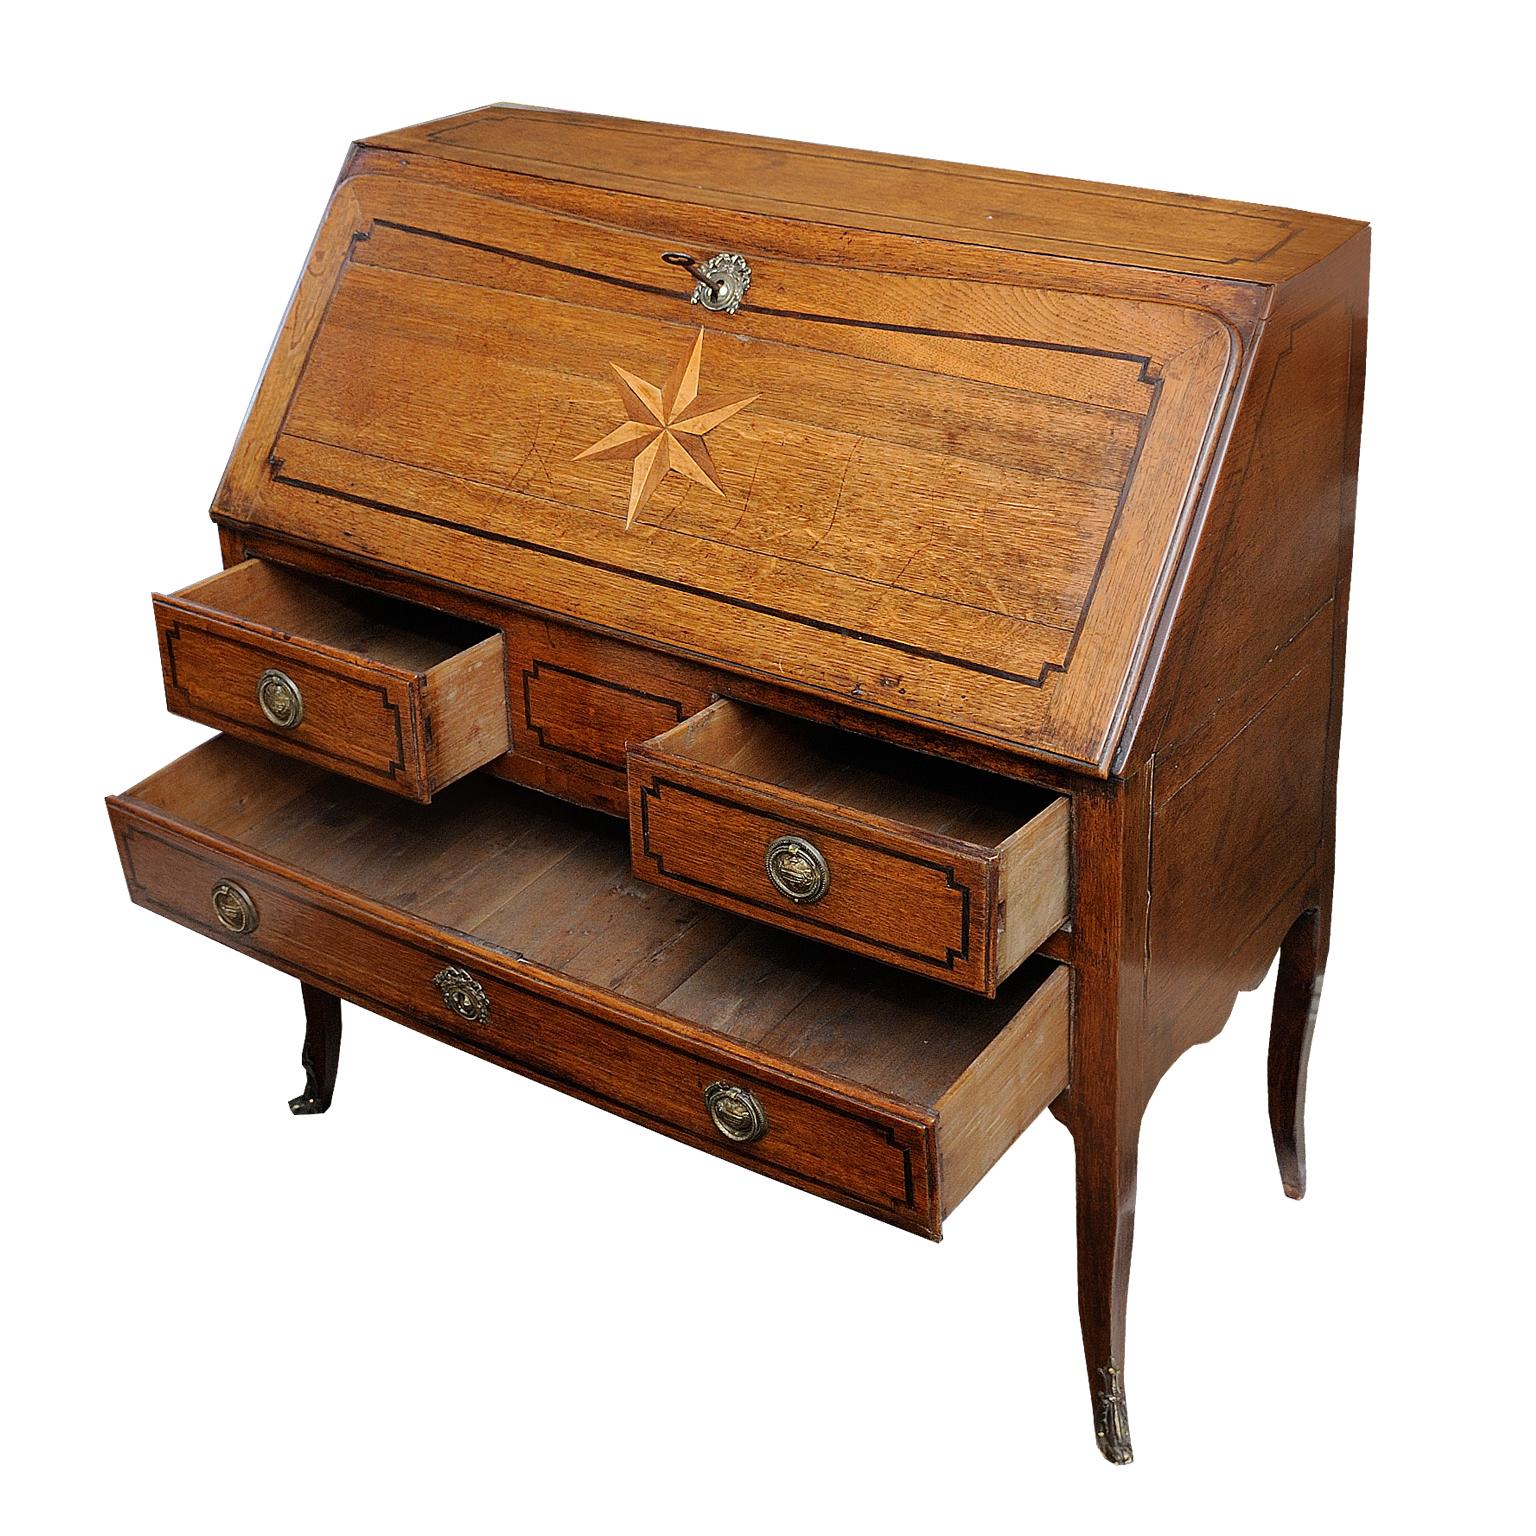 This is a lovely small Louis XV oak and inlaid mid-18th century bureau with fitted interior and secret compartment, circa 1750.

Measures: Height 96cm (37.7